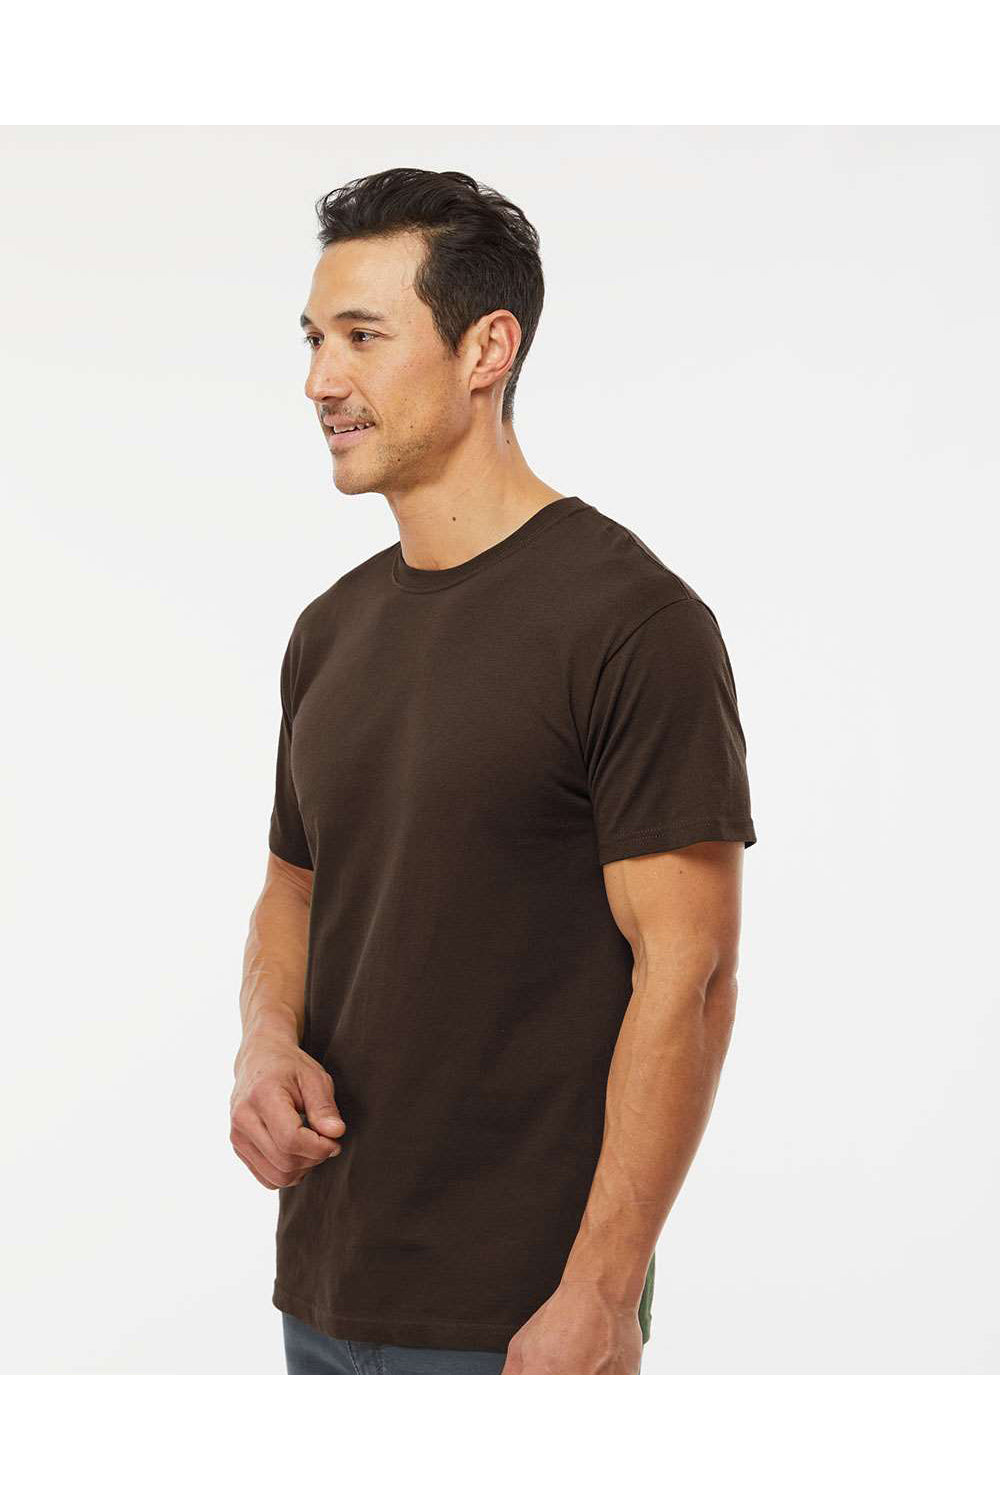 M&O 4800 Mens Gold Soft Touch Short Sleeve Crewneck T-Shirt Chocolate Brown Model Side